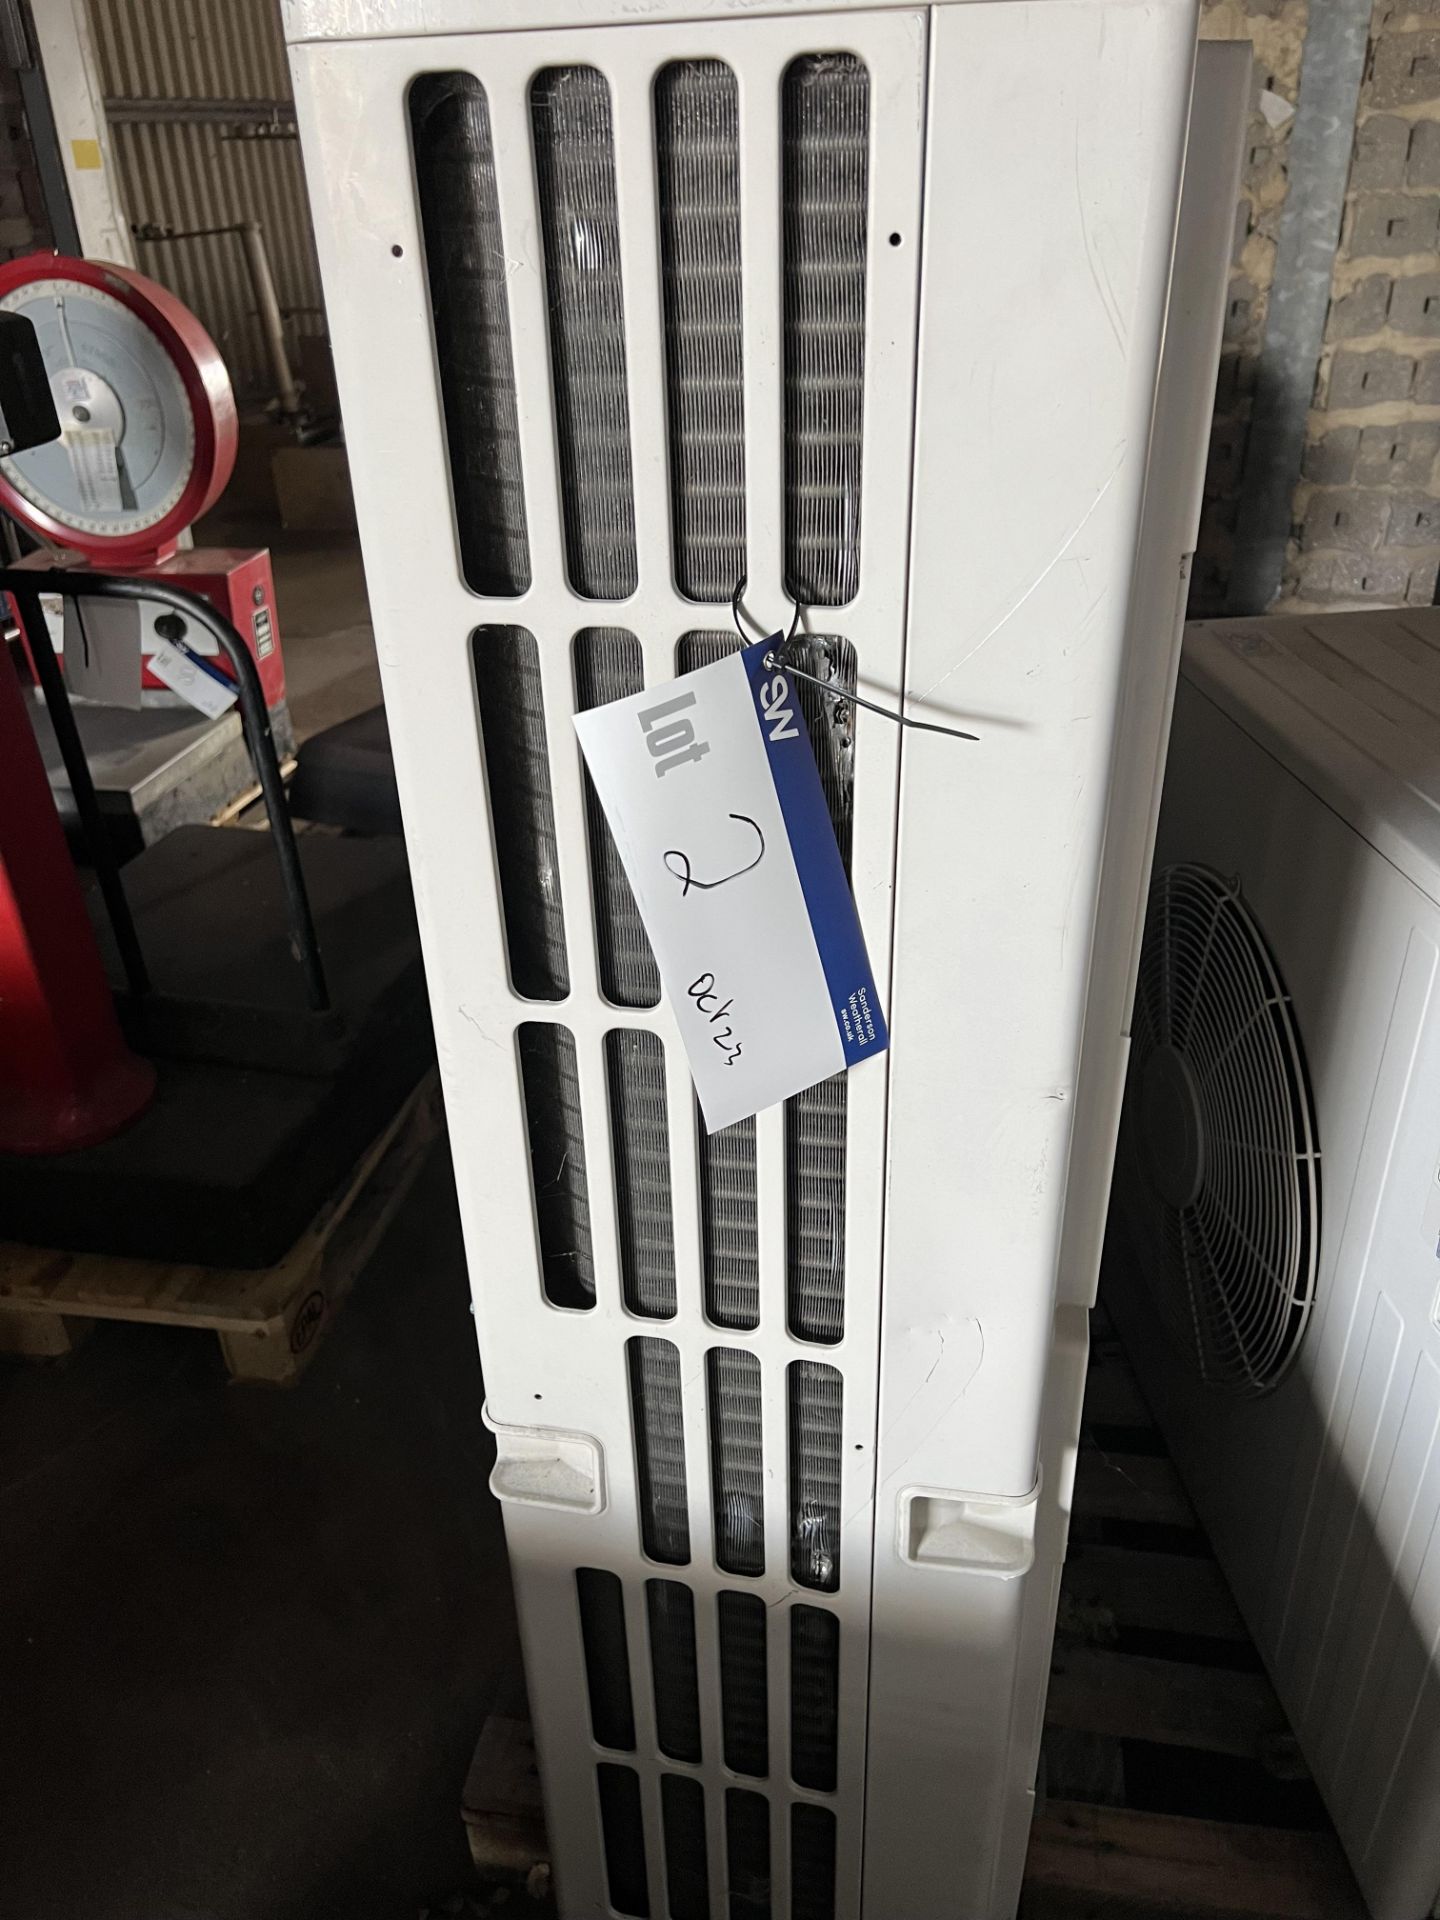 Mitsubishi Air Conditioner Unit, approx. 1.05m x 0.38cm x 1.4m high Please read the following